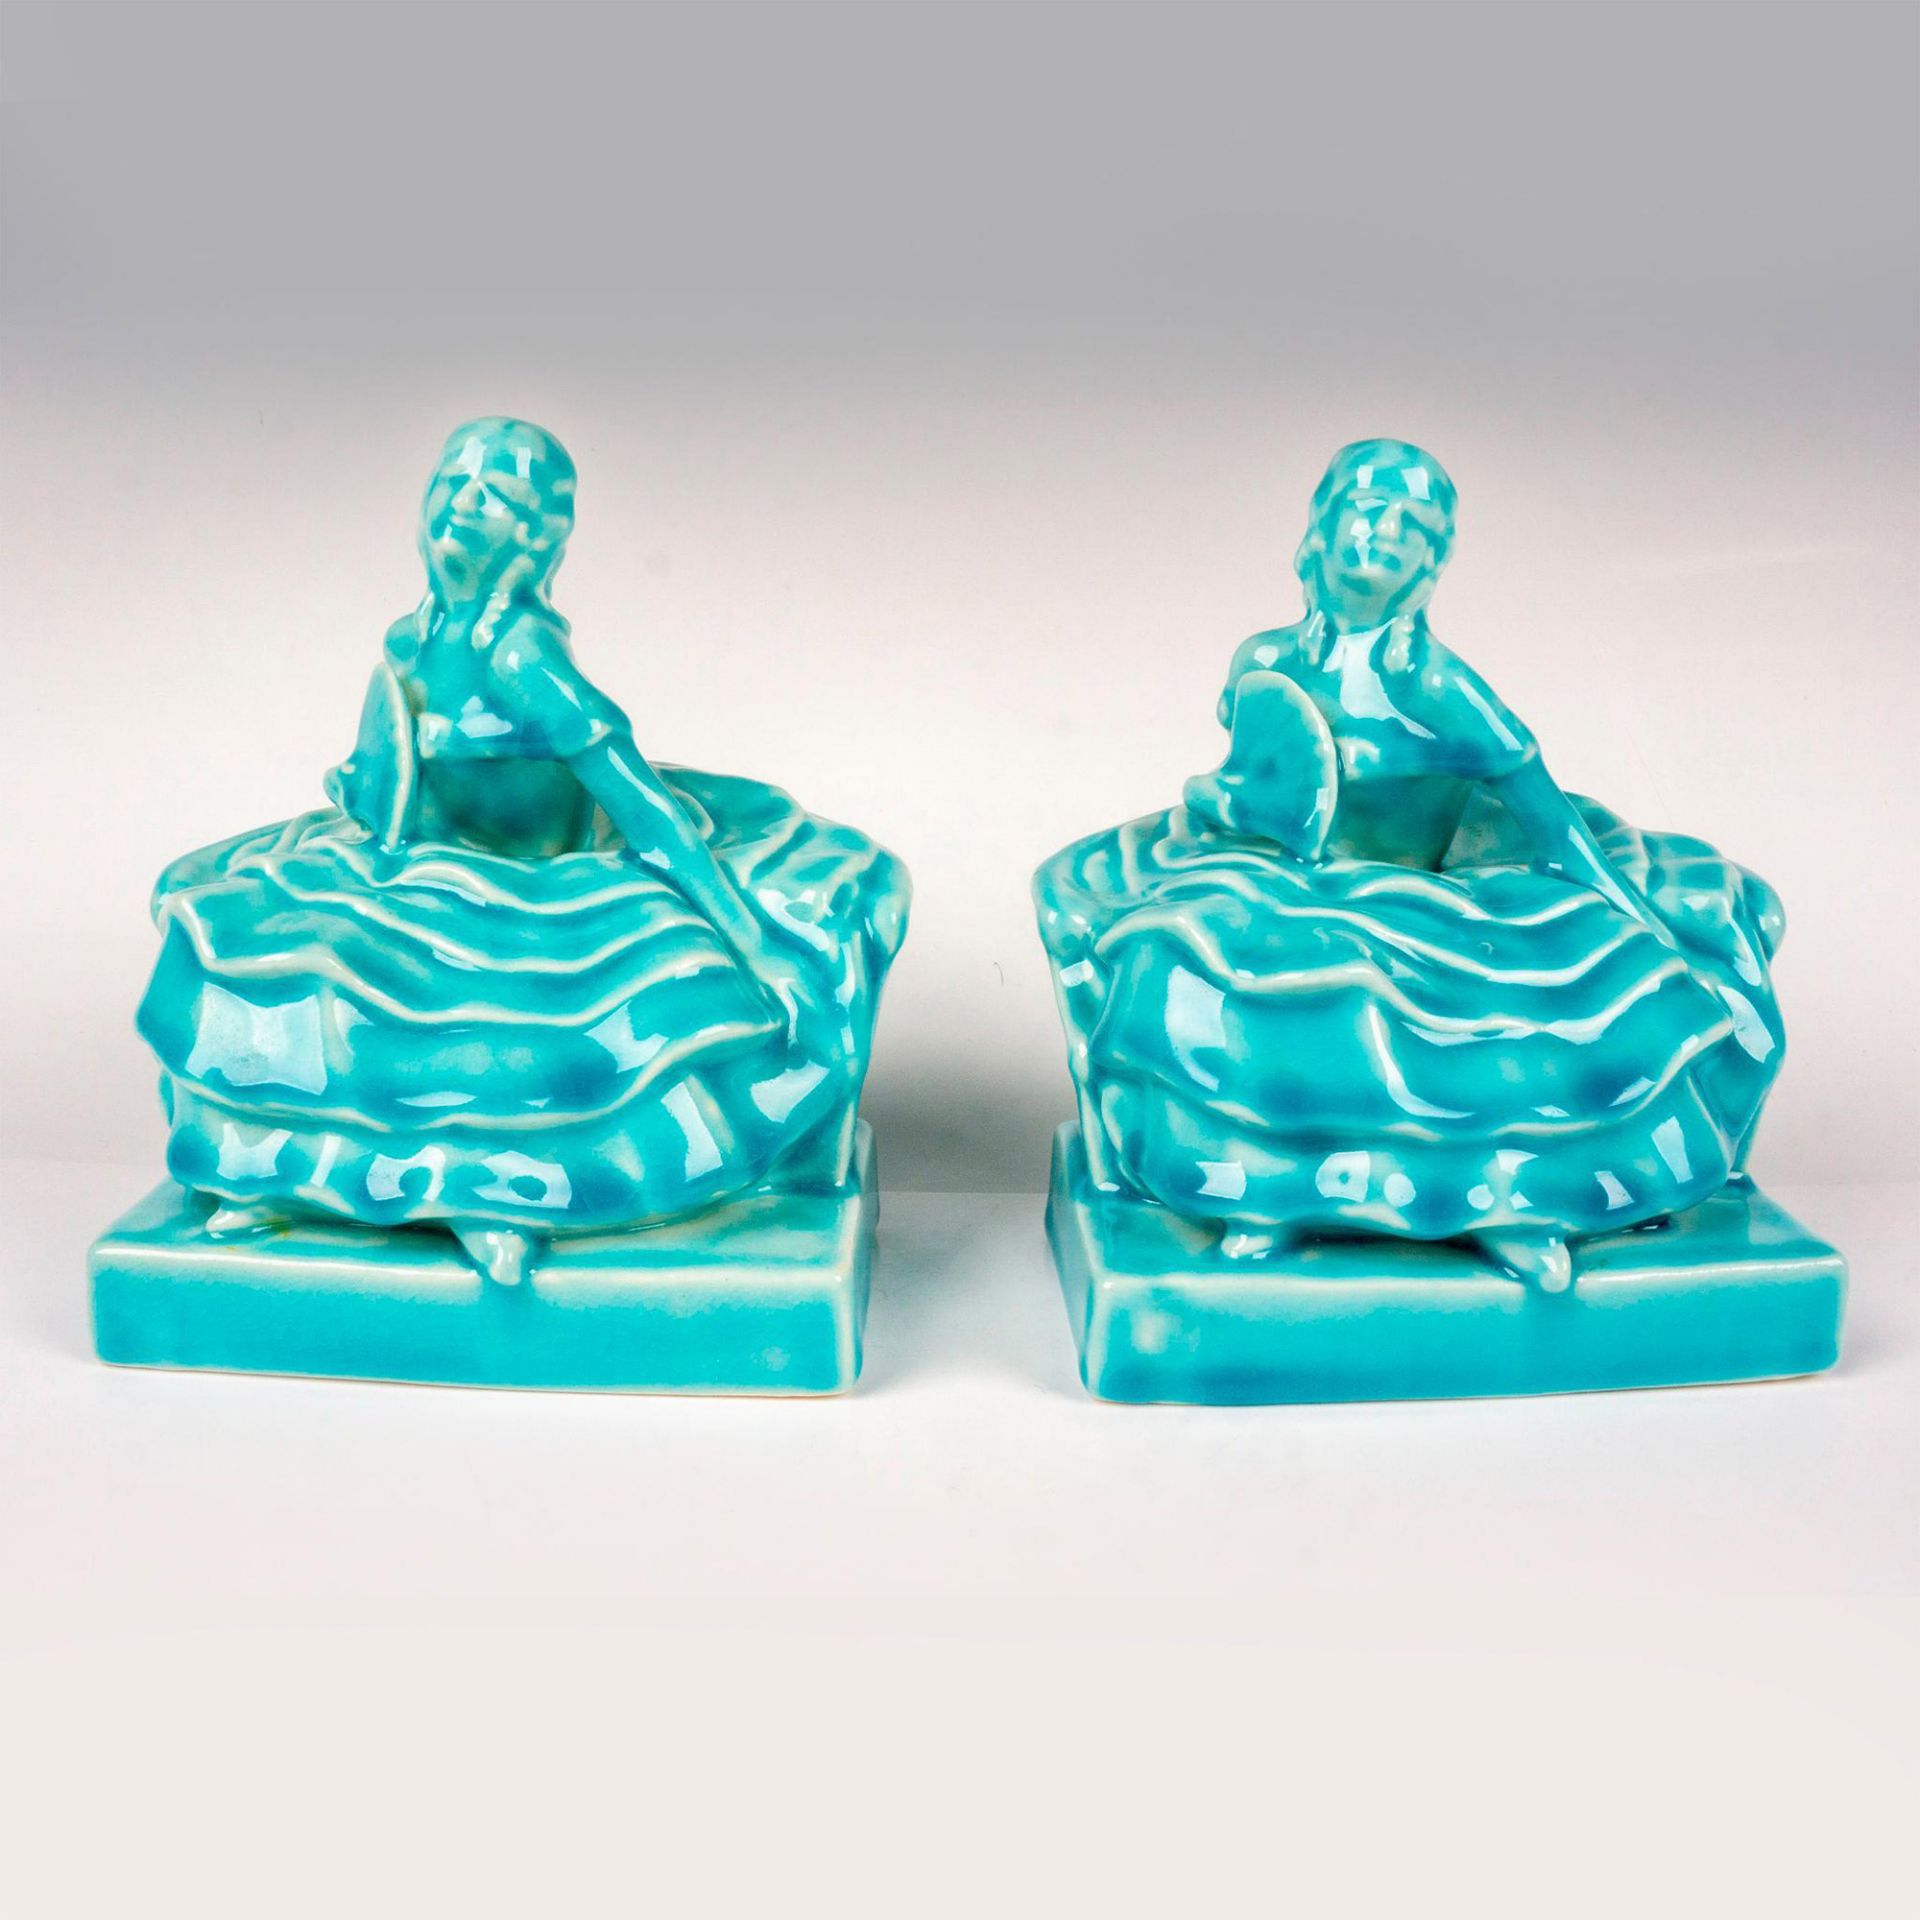 Pair of Rookwood Pottery Bookends, Colonial Ladies - Image 2 of 3